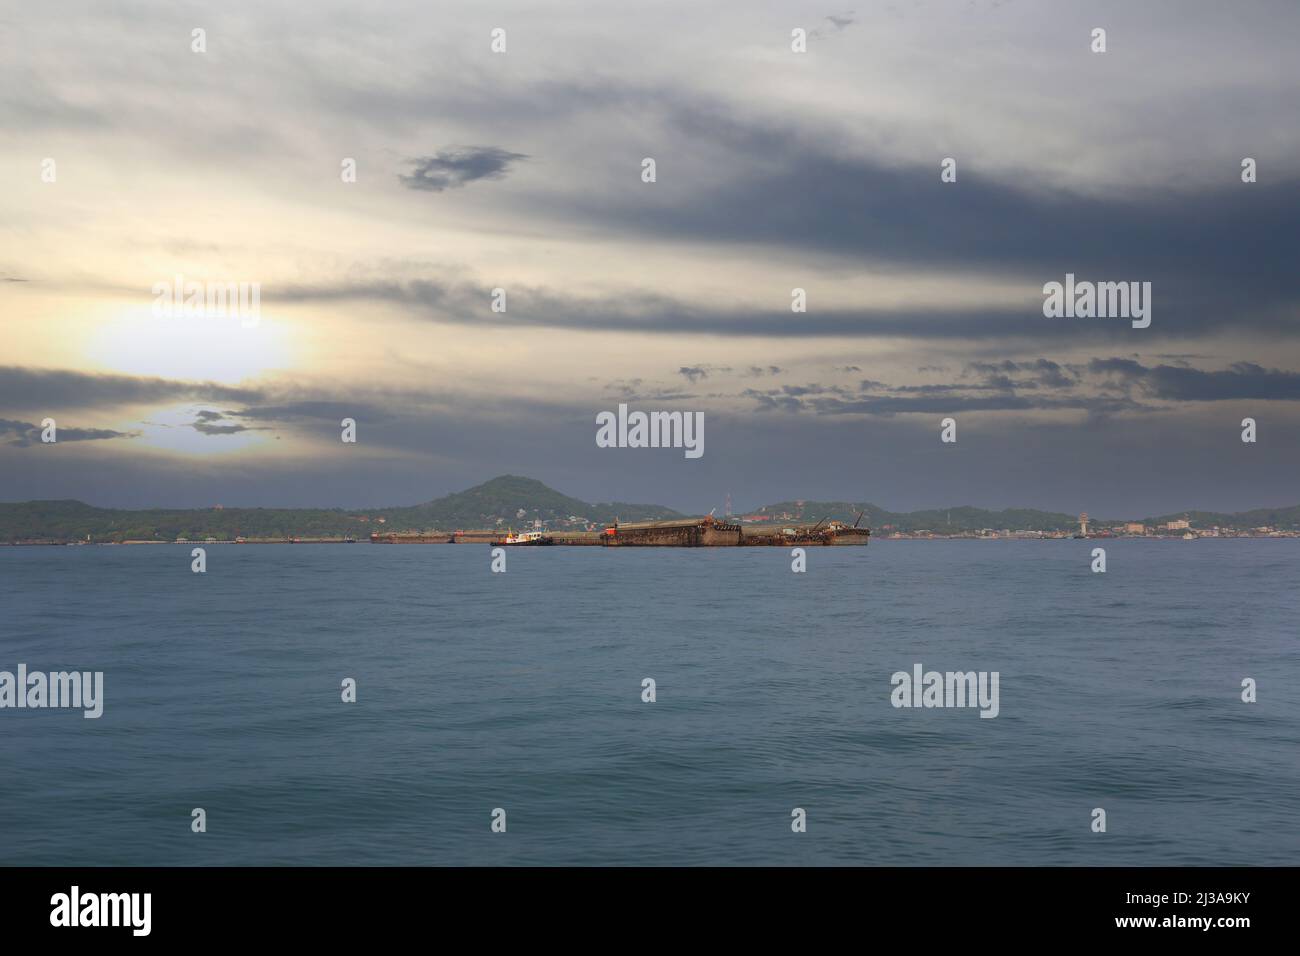 Coastal seas around Koh Sichang, Thailand are crowded with cargo ships on a clear day. Stock Photo